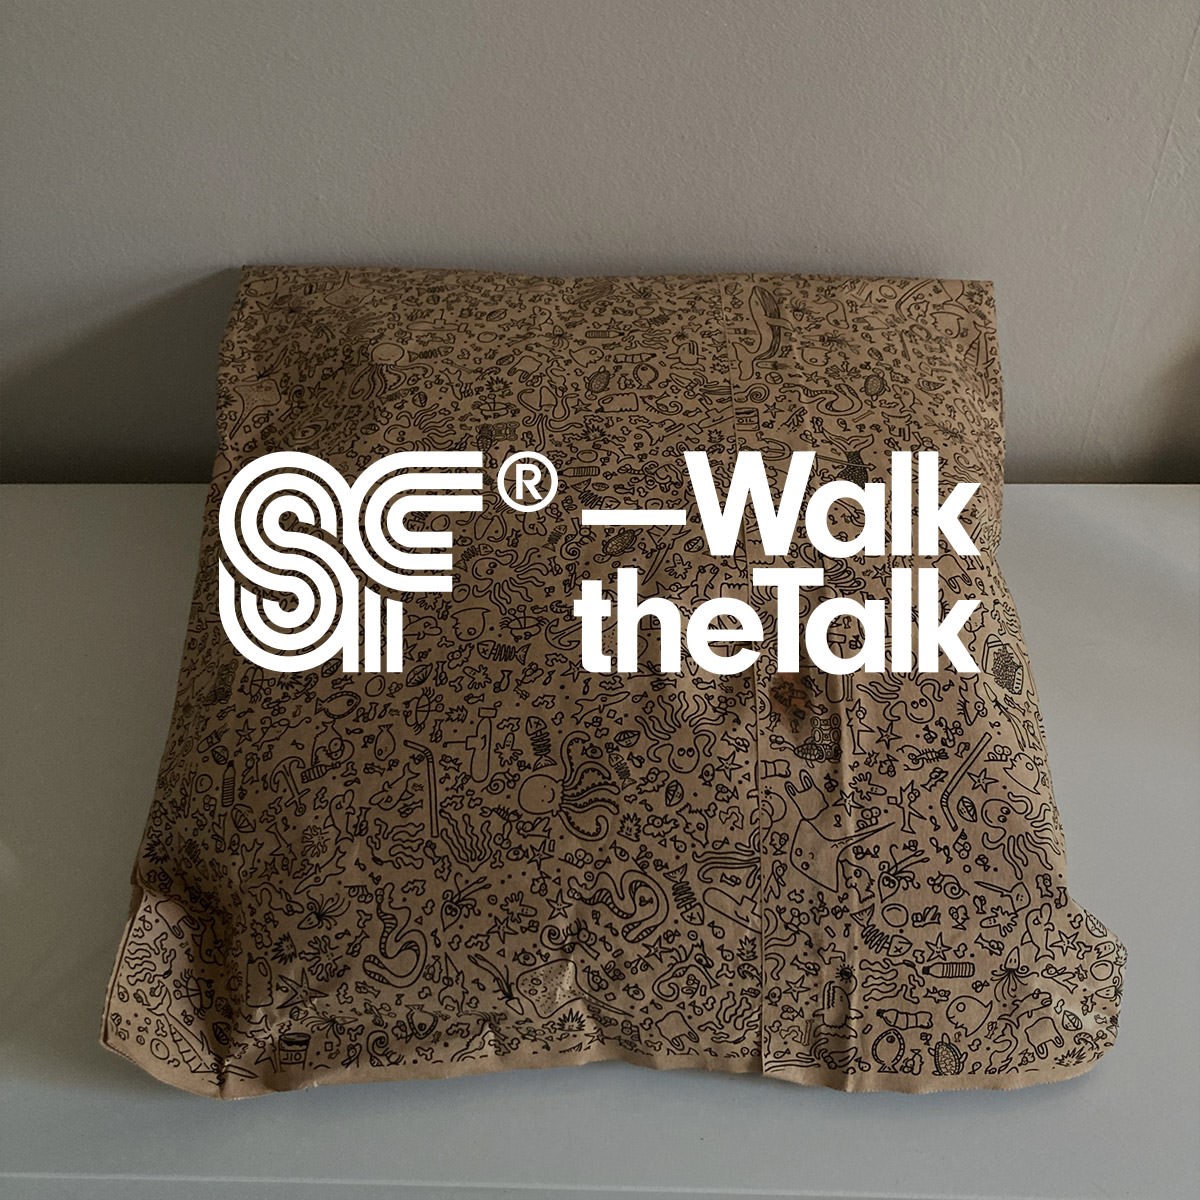 Superfried – Walk the Talk logo. Buying eco products from Rapanui. Considering purchases to reduce my environmental impact.